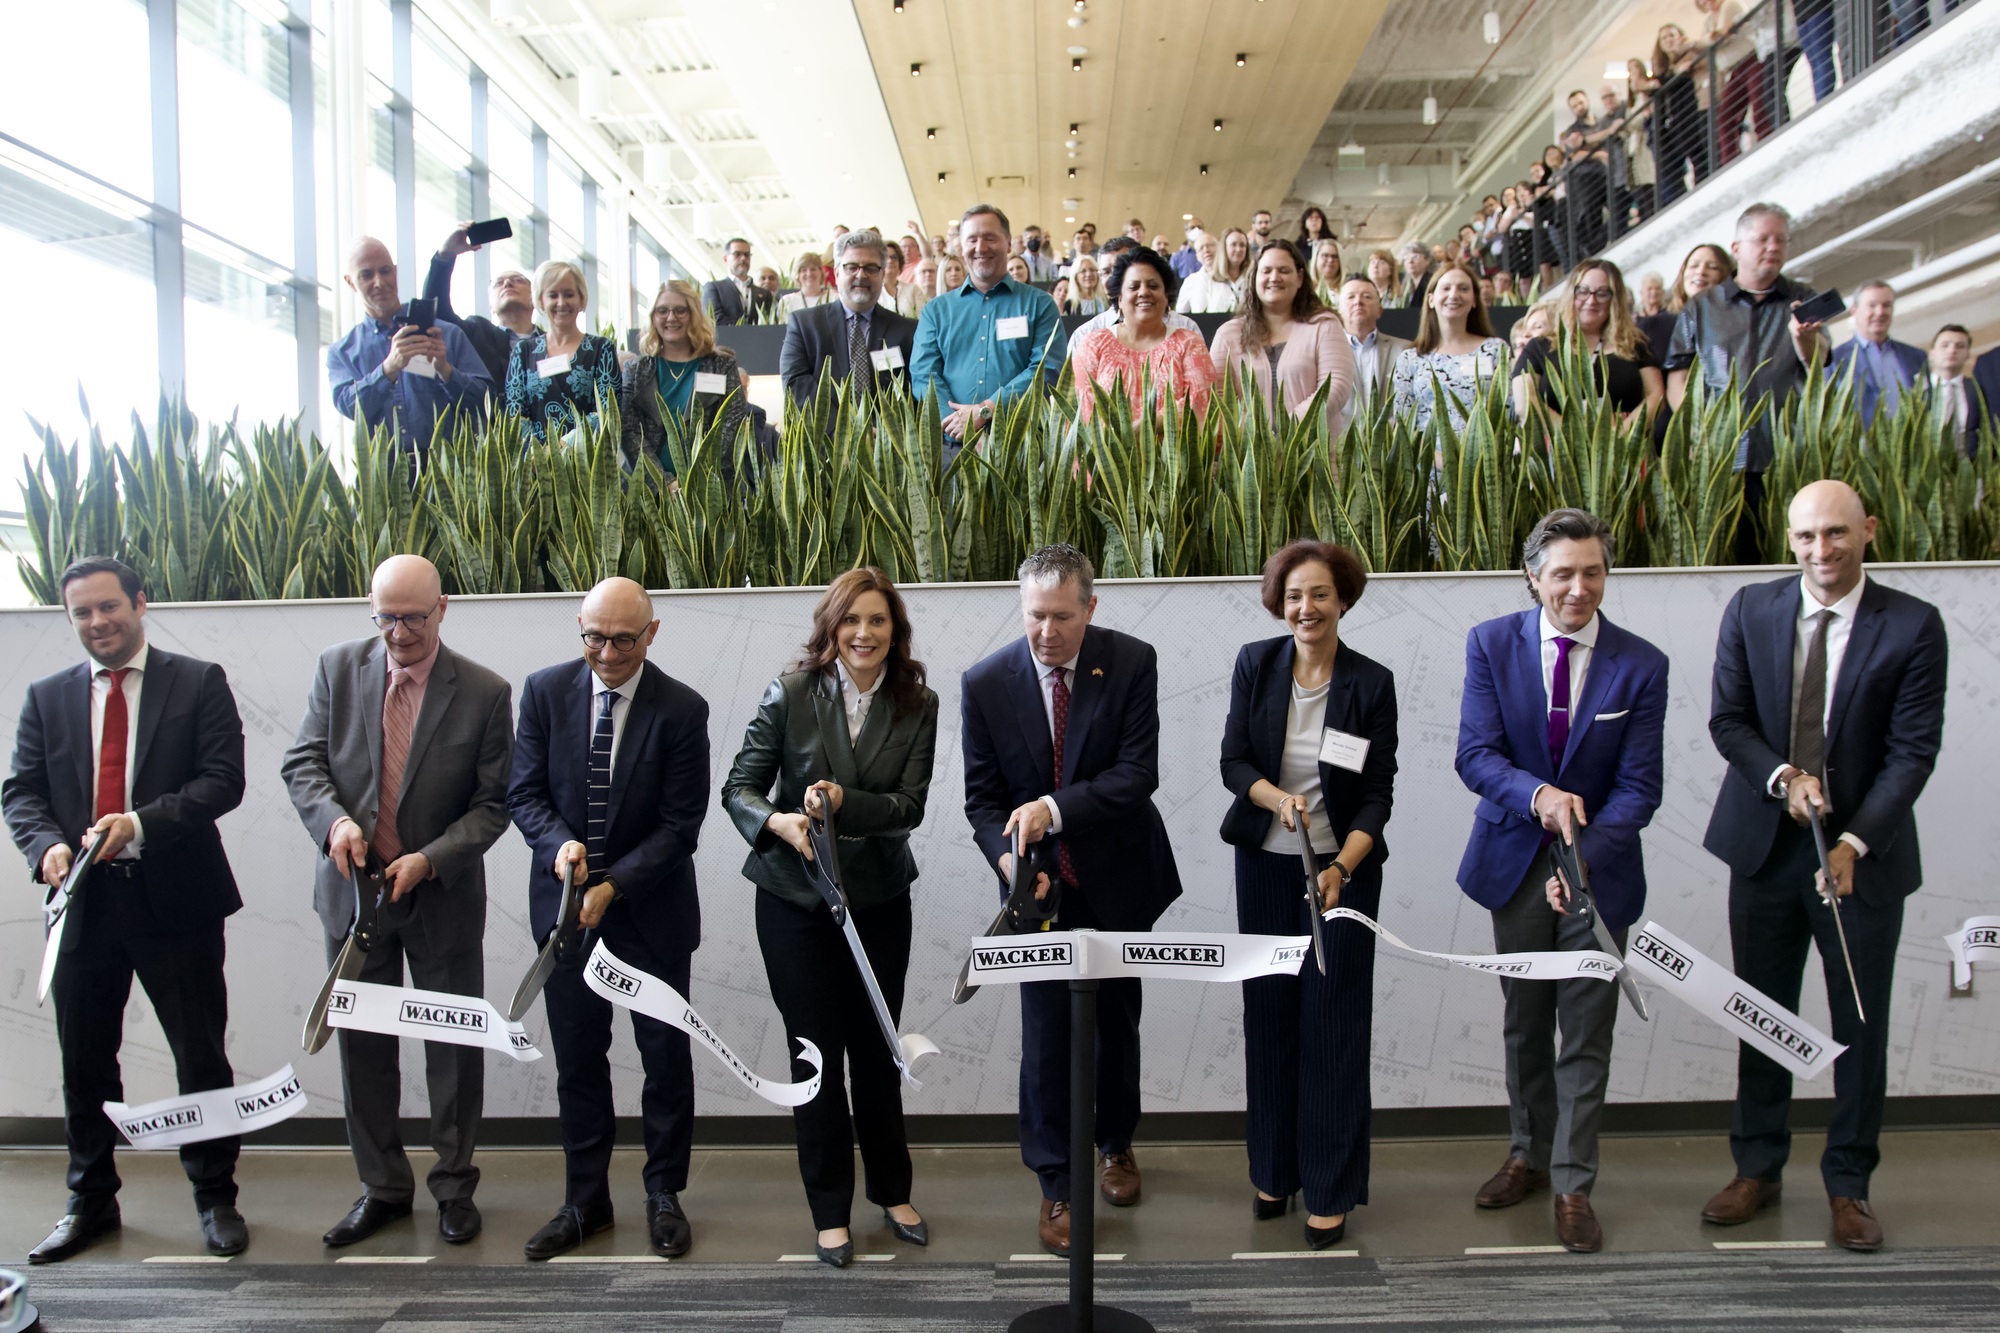 Governor Whitmer participates in a ribbon-cutting ceremony at the Wacker Innovation Center.